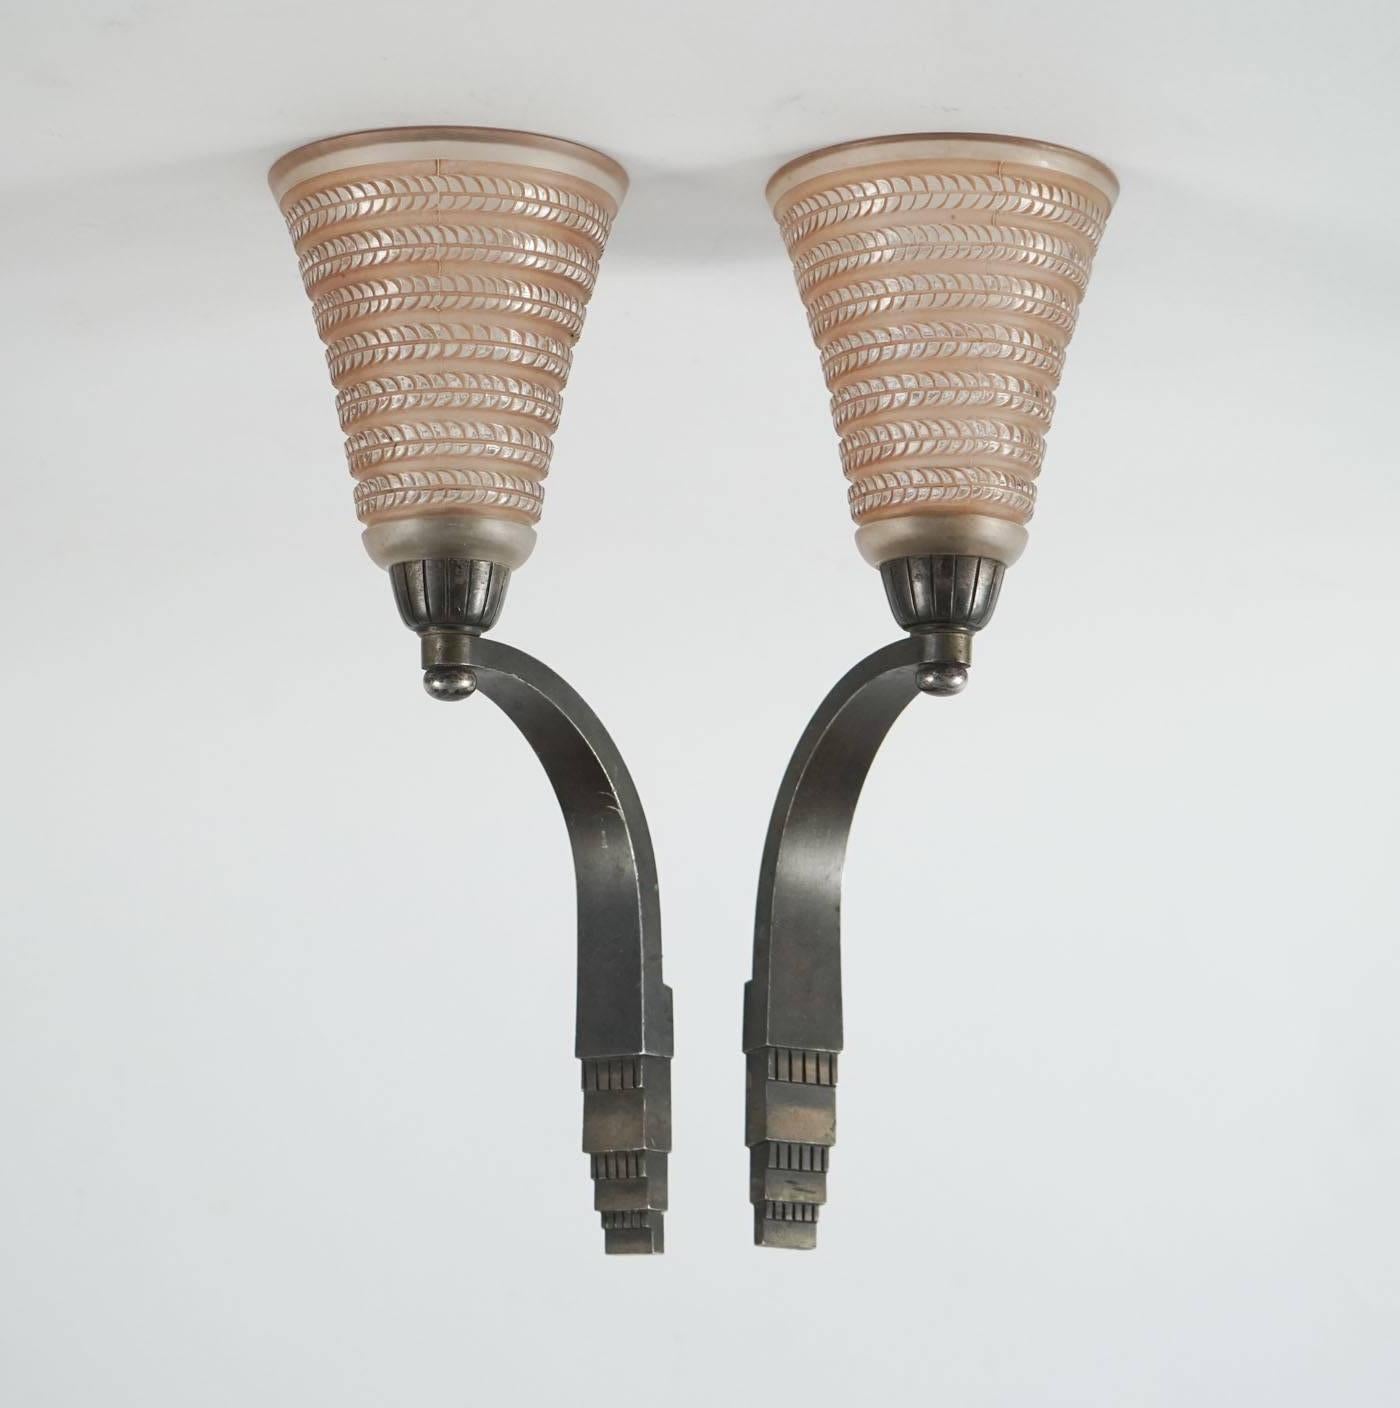 Frosted and highlighted with sienna patinated stain glass with a bronze applique mount; Art Deco stylized vertical bands of small leaves on stems tulipe
Model: 2702, circa 1926.
Paire d'appliques à deux tulipes en verre moulé pressé modèle